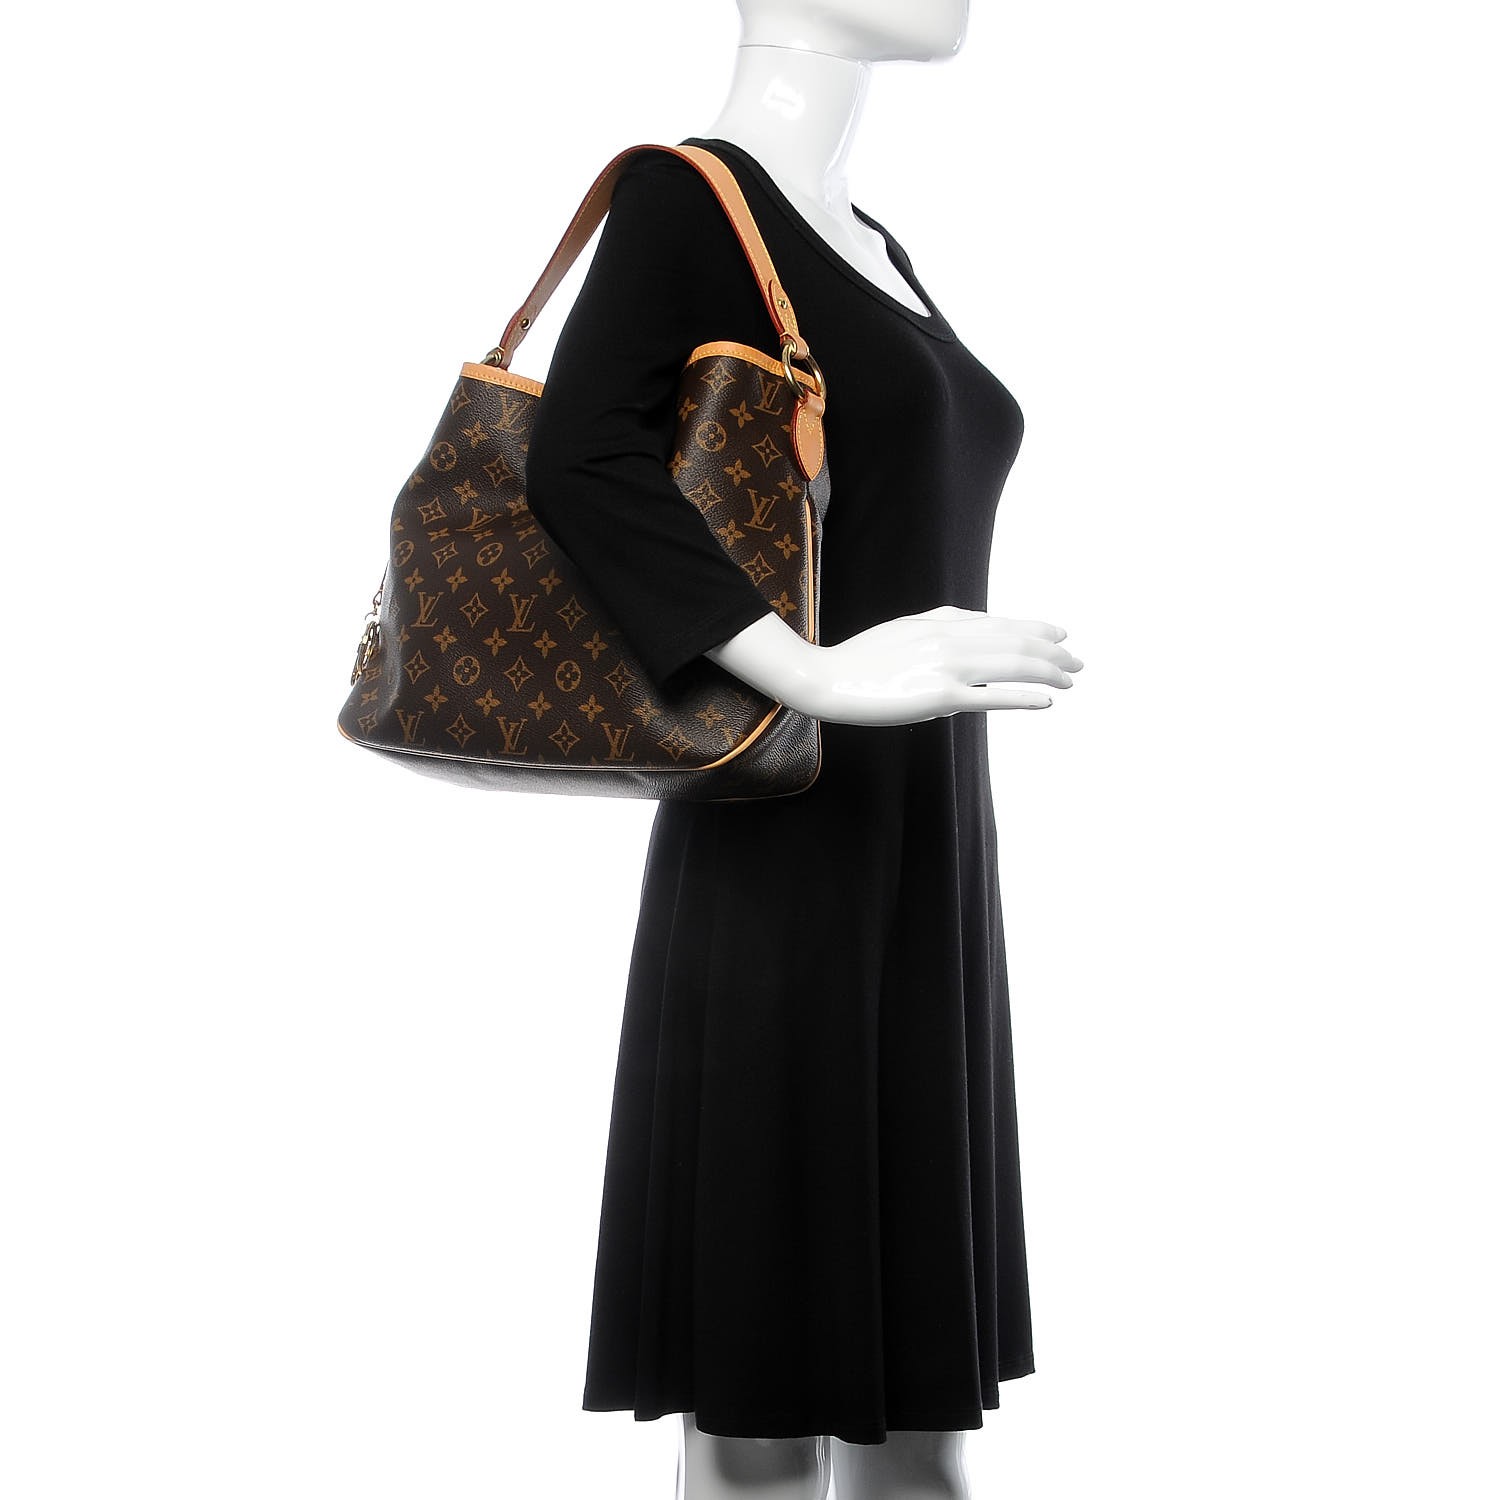 Louis Vuitton (LV) Delightful PM (with receipt) - Discontinued